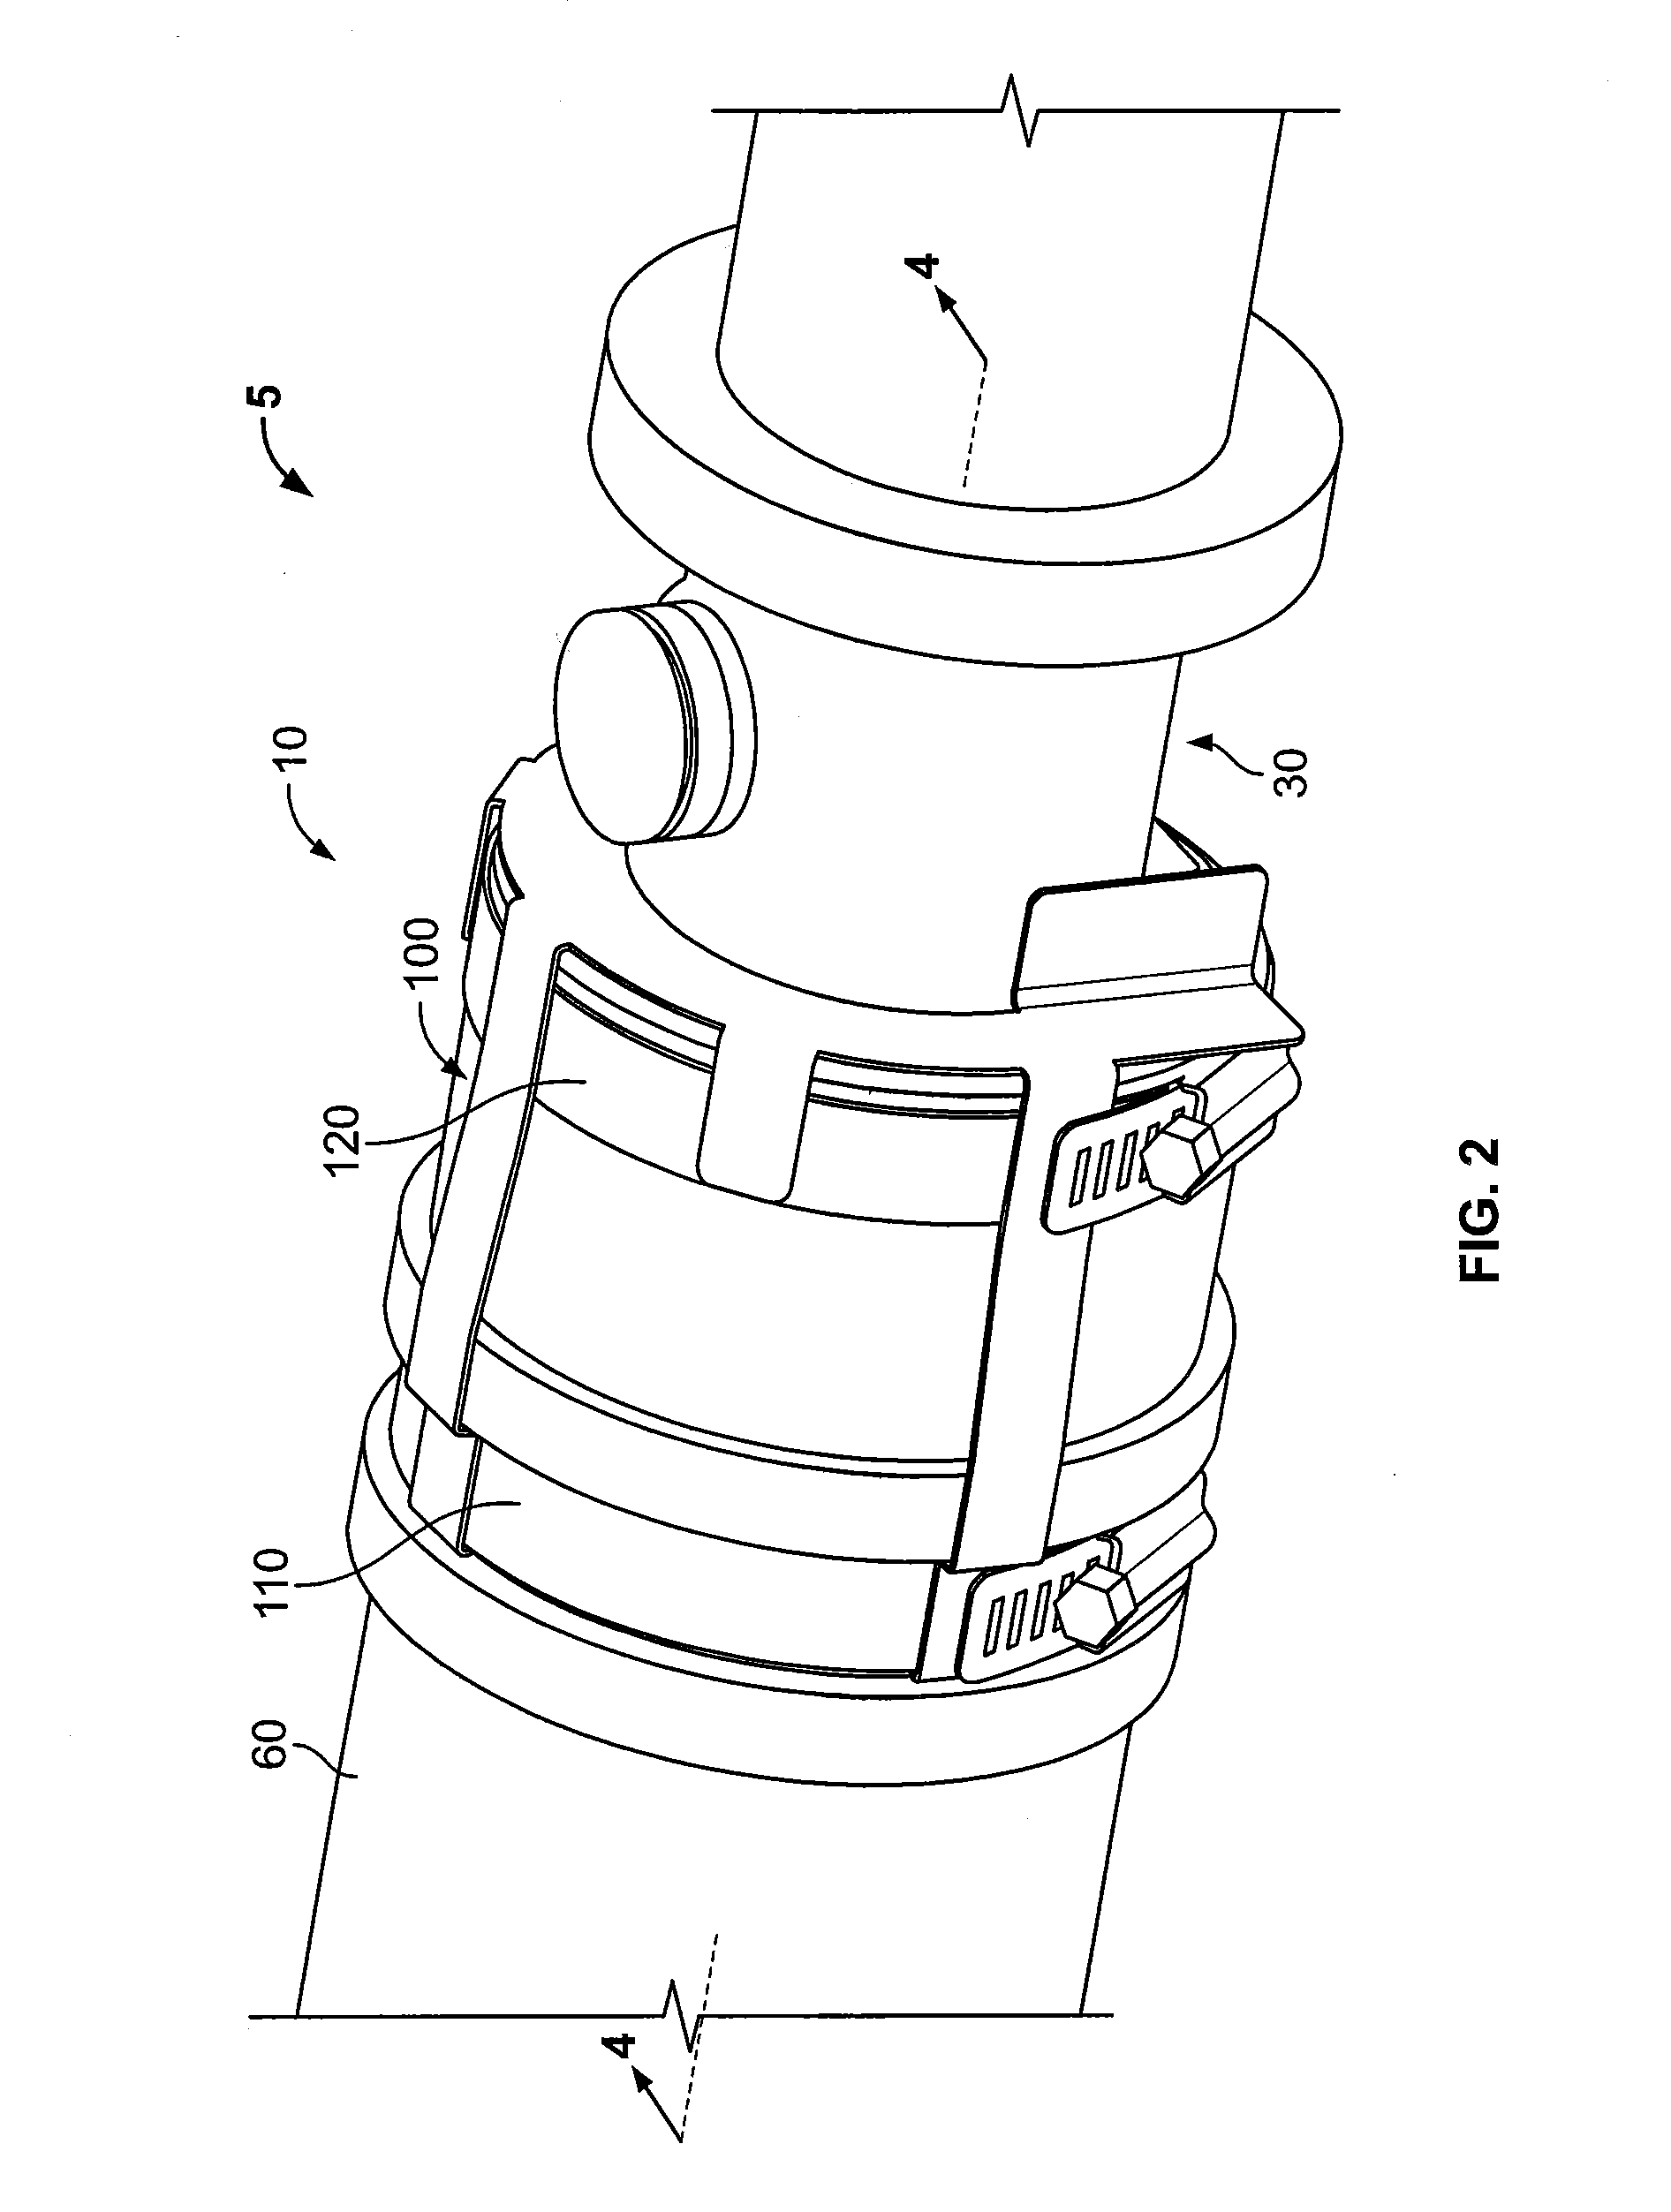 Splice sleeve retainers and electrical connection assemblies and methods including same